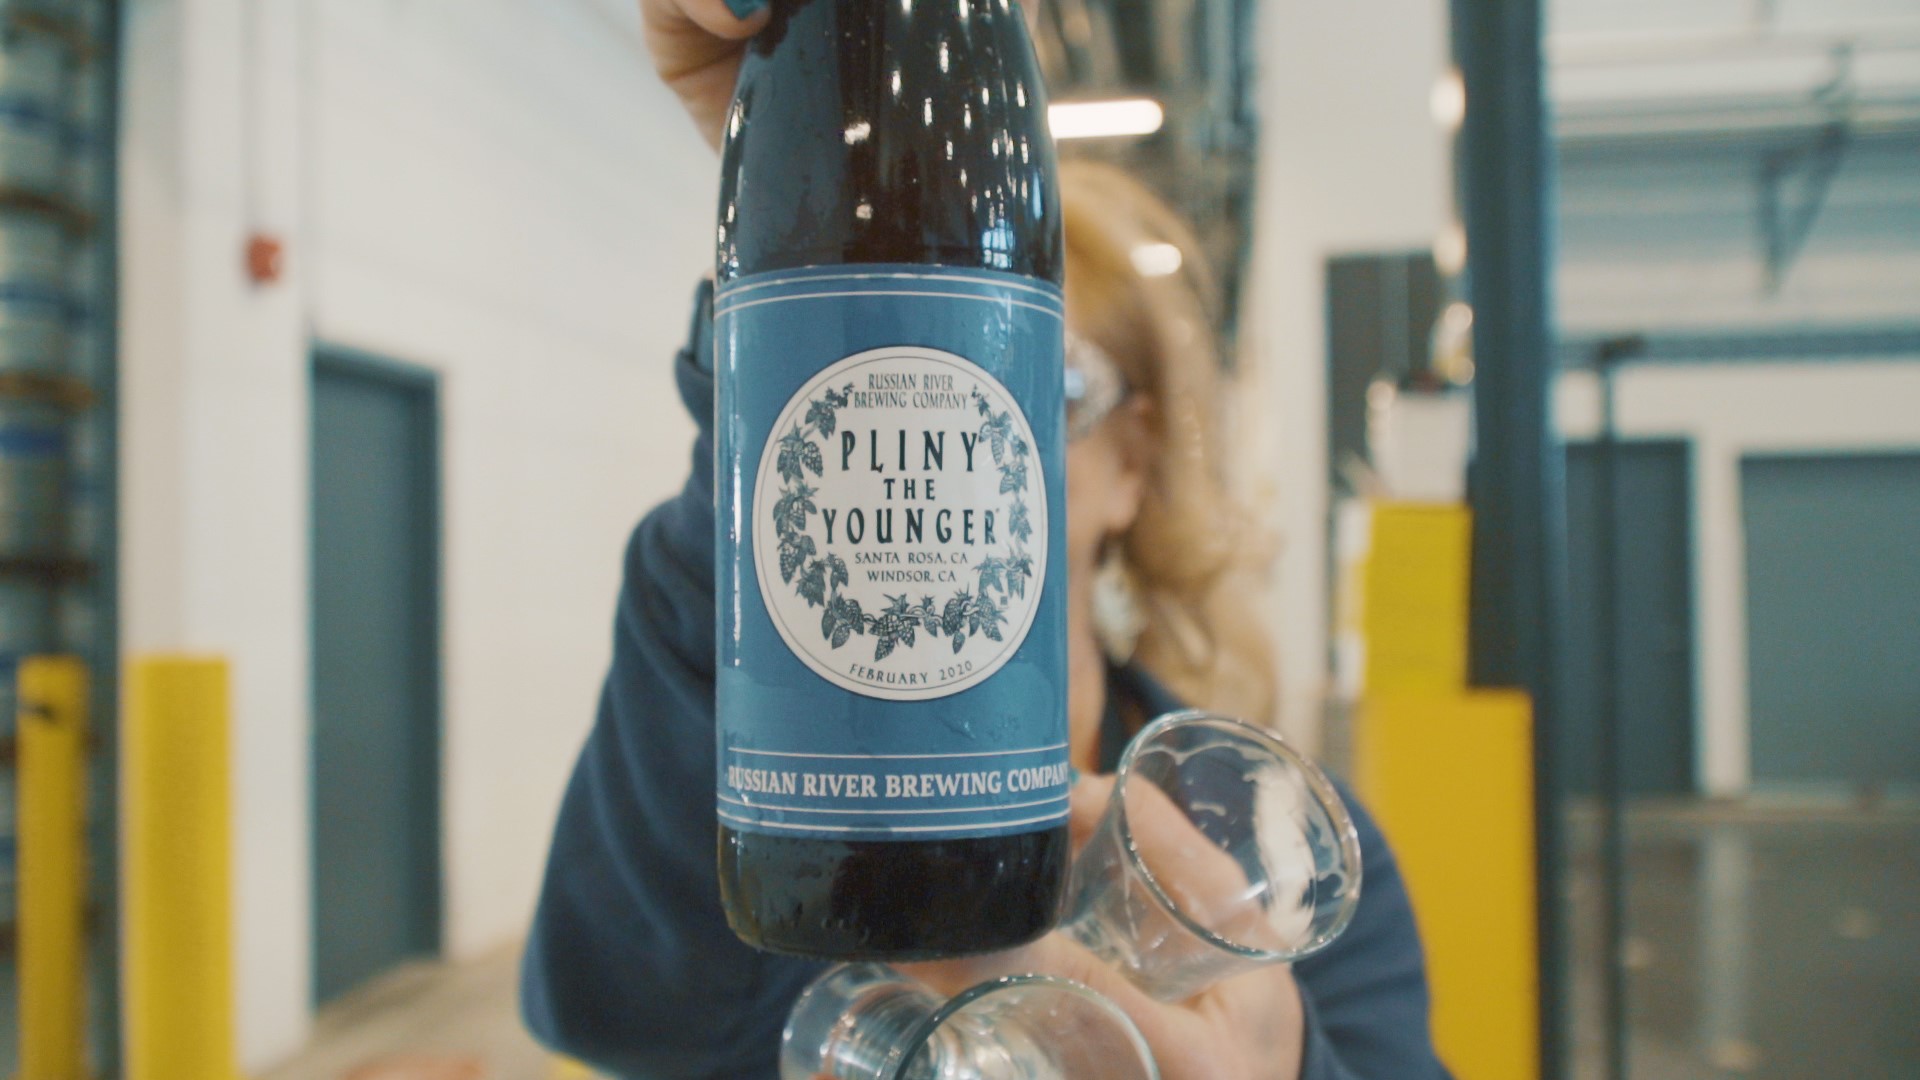 For 15 years, Russian River Brewing Company has been brewing Pliny the Younger for limited distribution every February. This year, they've bottled it.